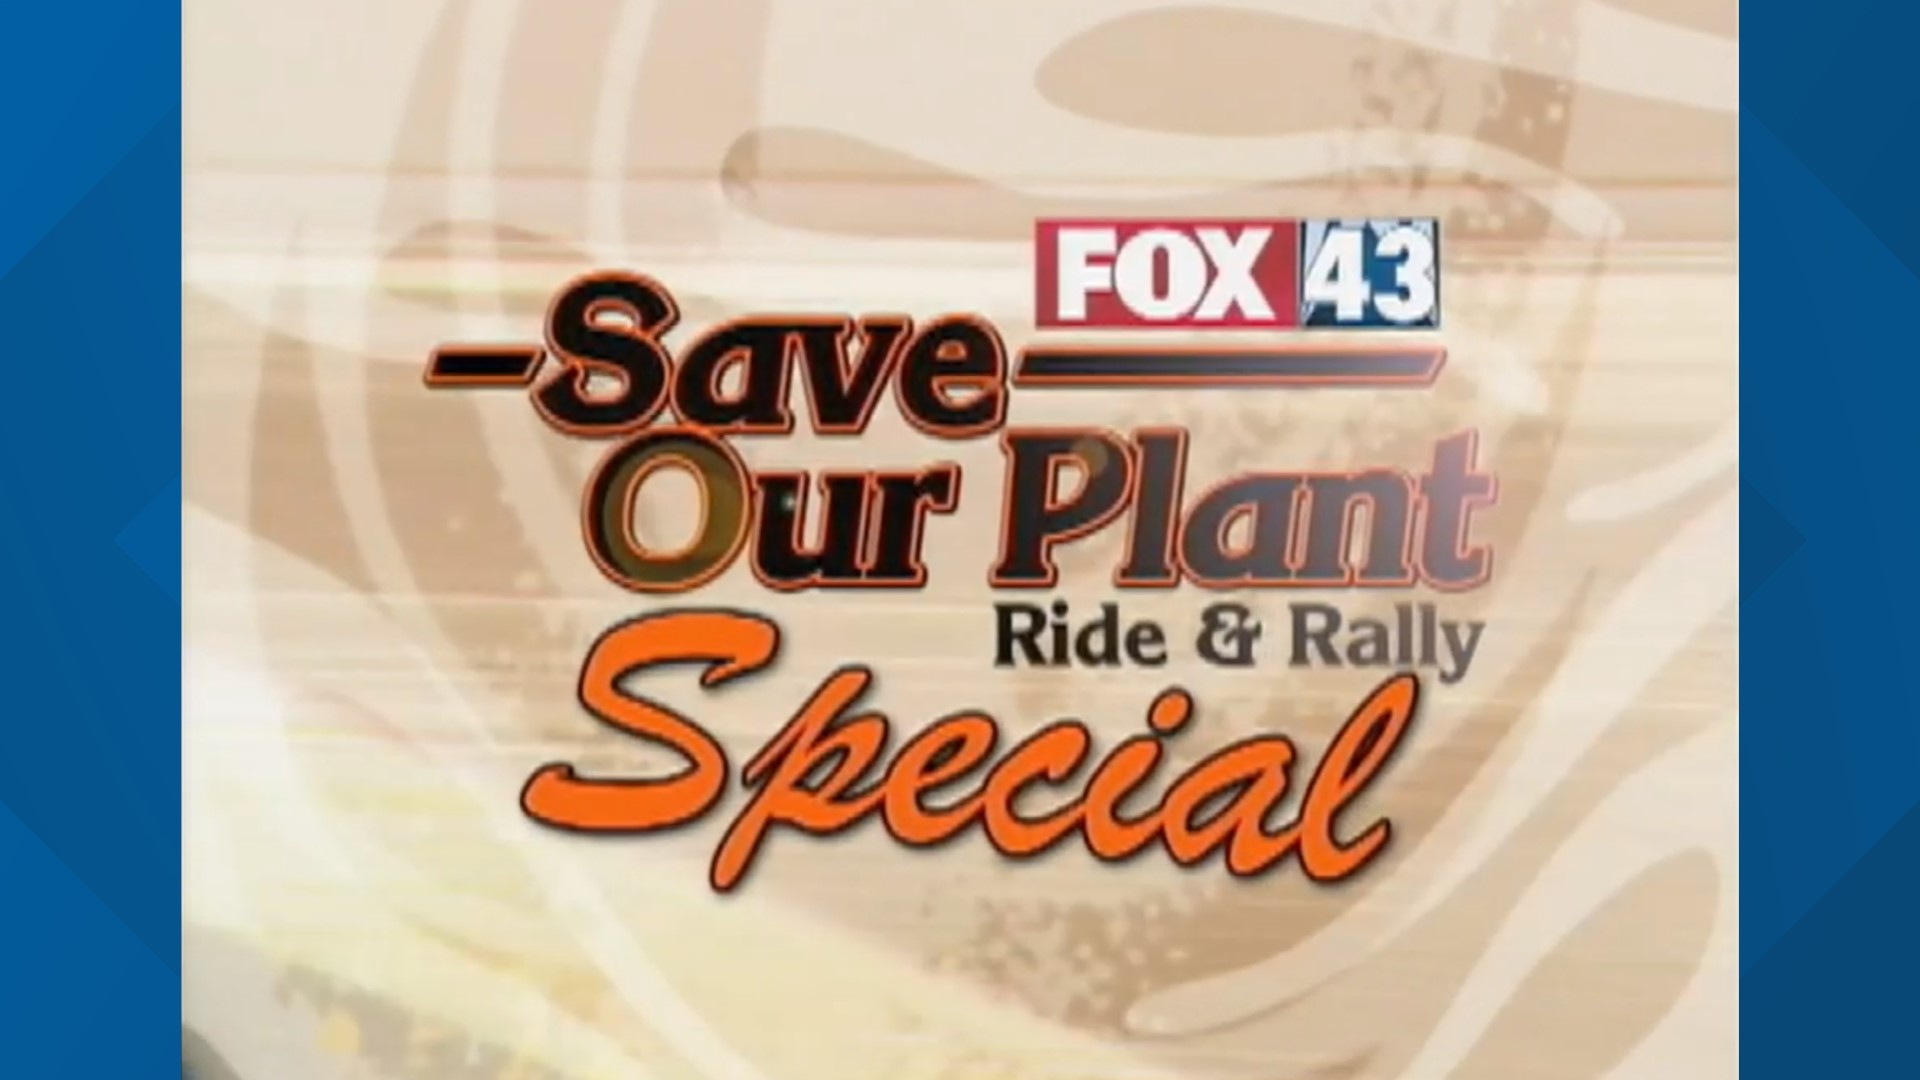 FOX43 organized the "Save the Plant Ride and Rally" in August 2009, and the event drew hundreds to show support for what Harley Davidson meant to the community.